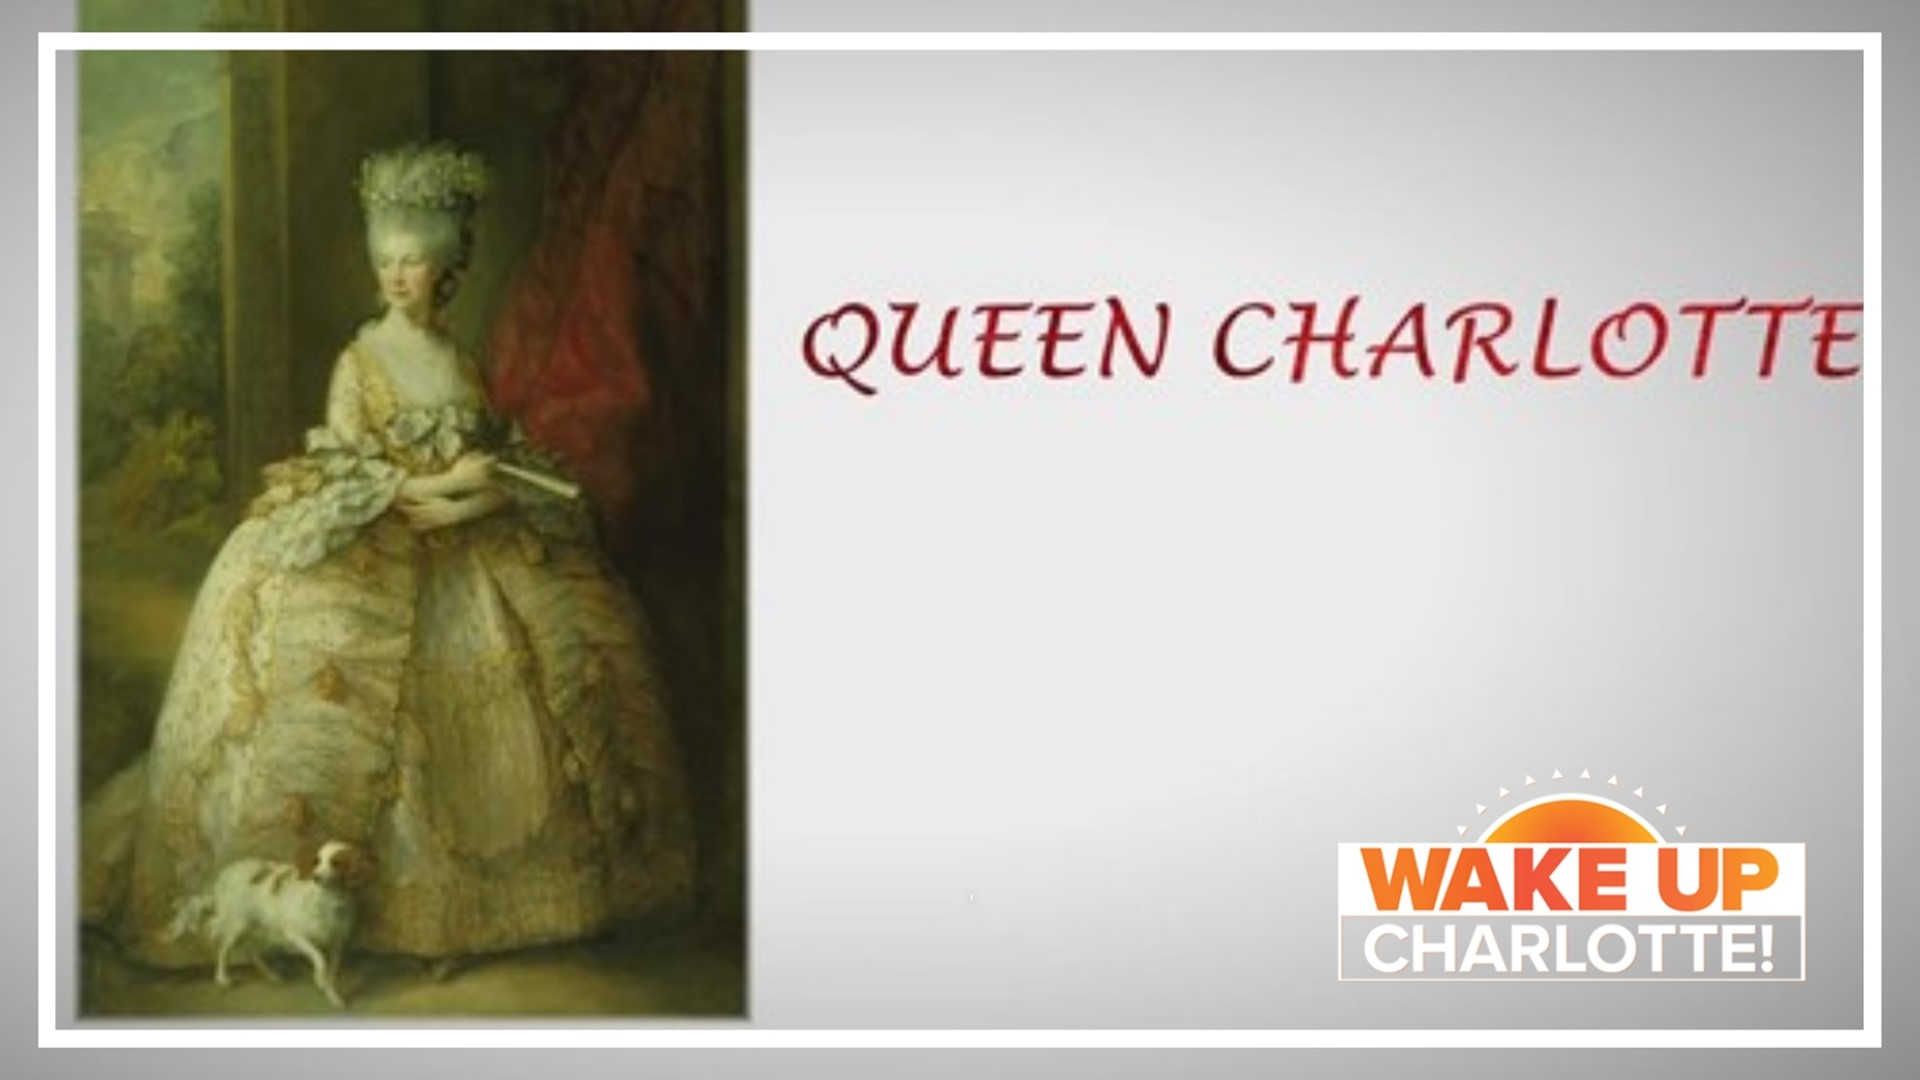 Some say when Prince Harry and Meghan got married there were nods to Queen Charlotte.